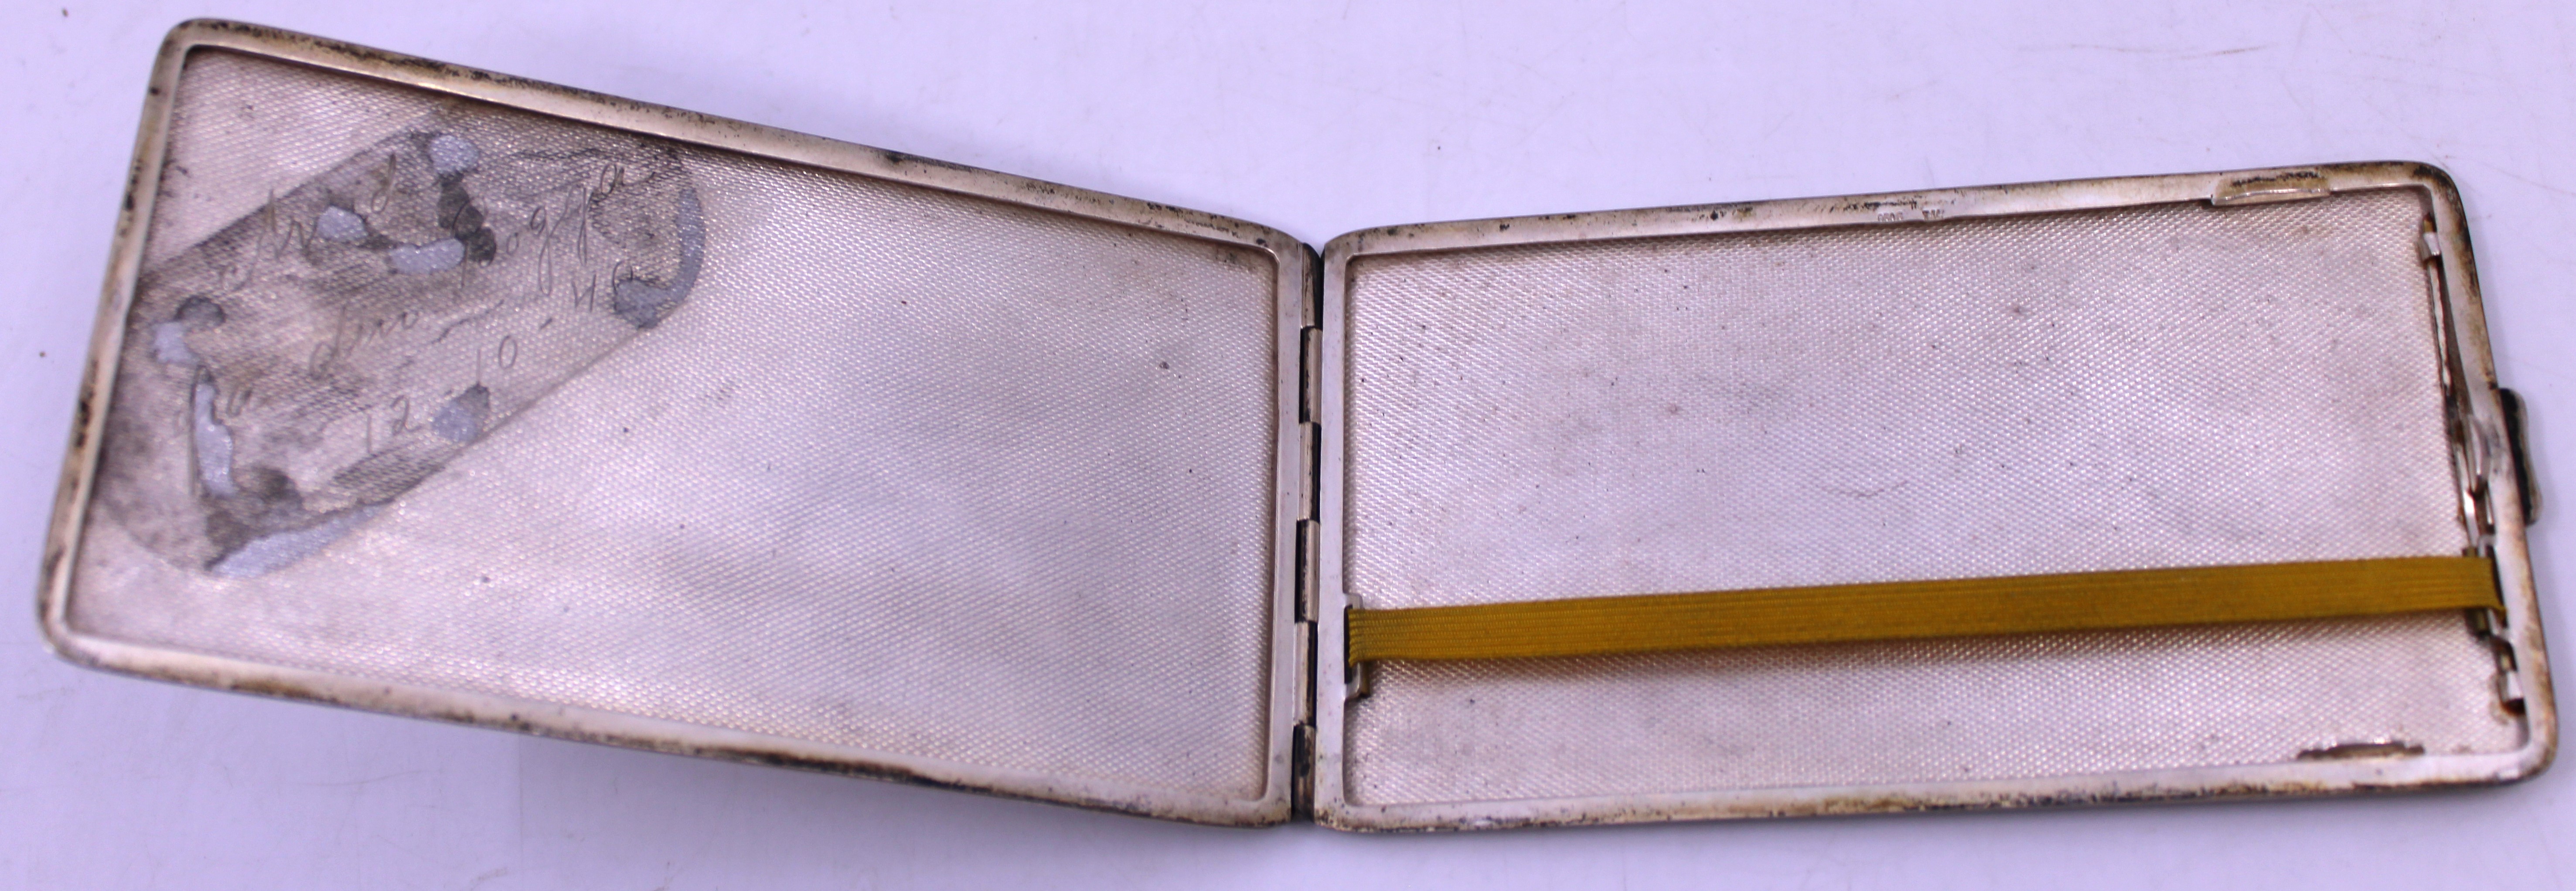 Two Norwegian Silver Cigaratte Cases.  One of the Cigarette Cases is marked "T.K 830 S" and is - Image 2 of 3